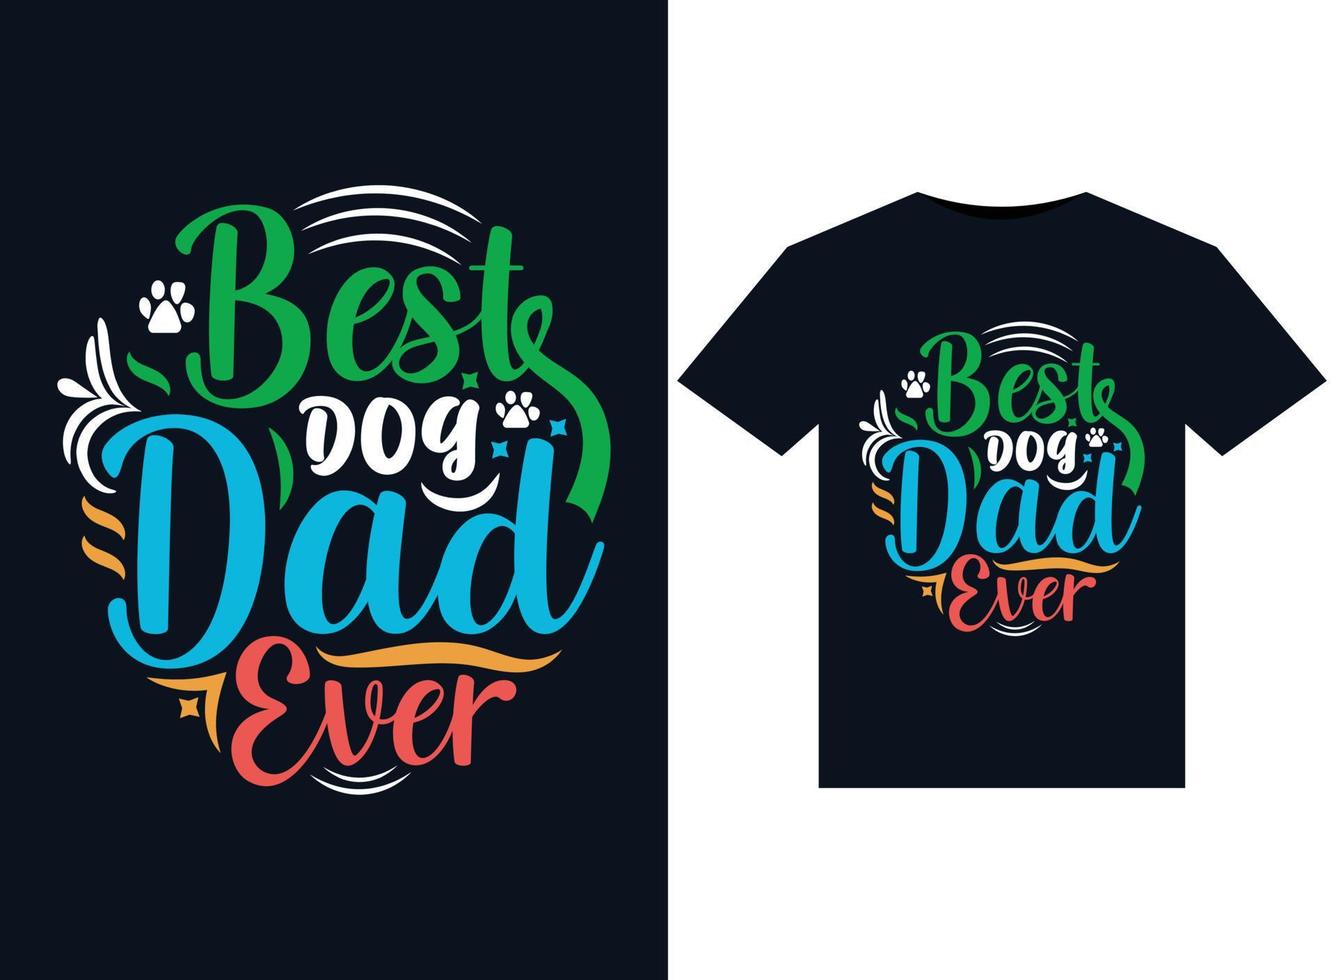 Best Dog Dad Ever illustrations for print-ready T-Shirts design vector